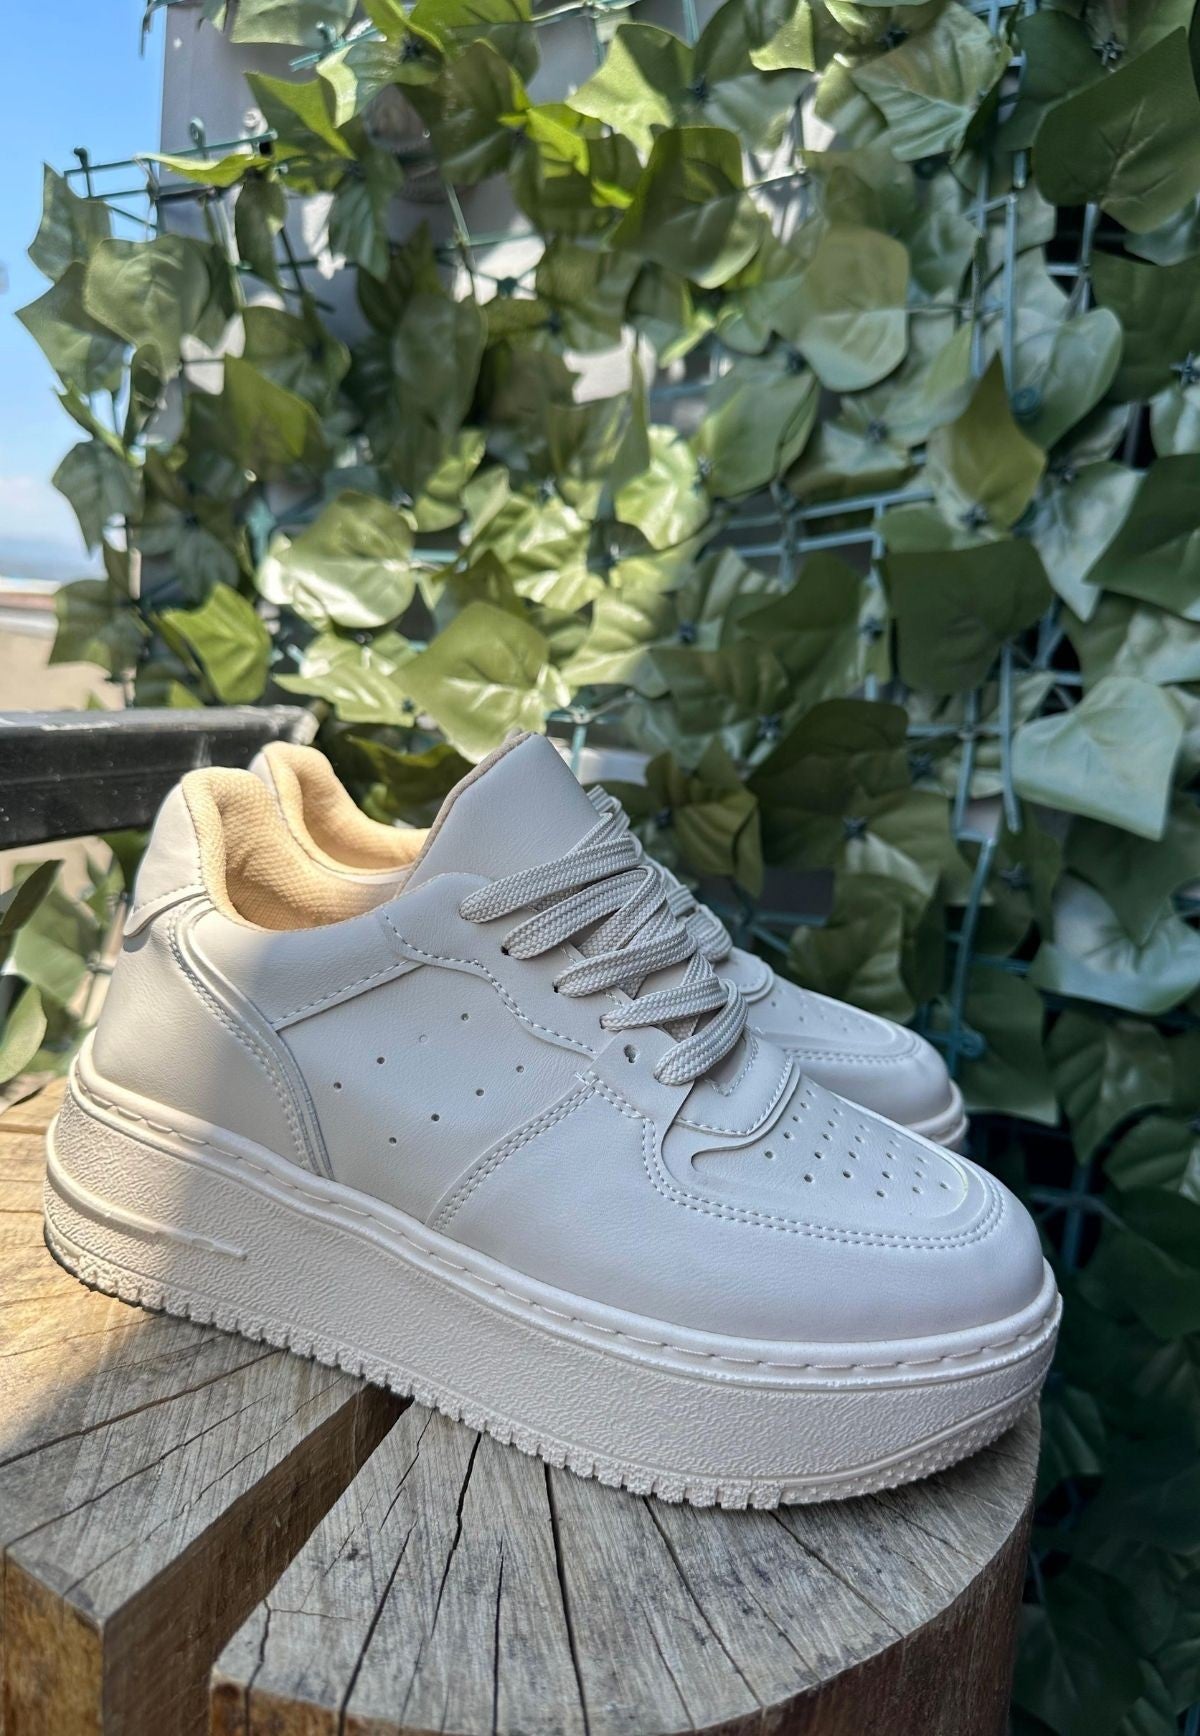 Women's Beige Leather Lace-up Sneakers - STREETMODE™